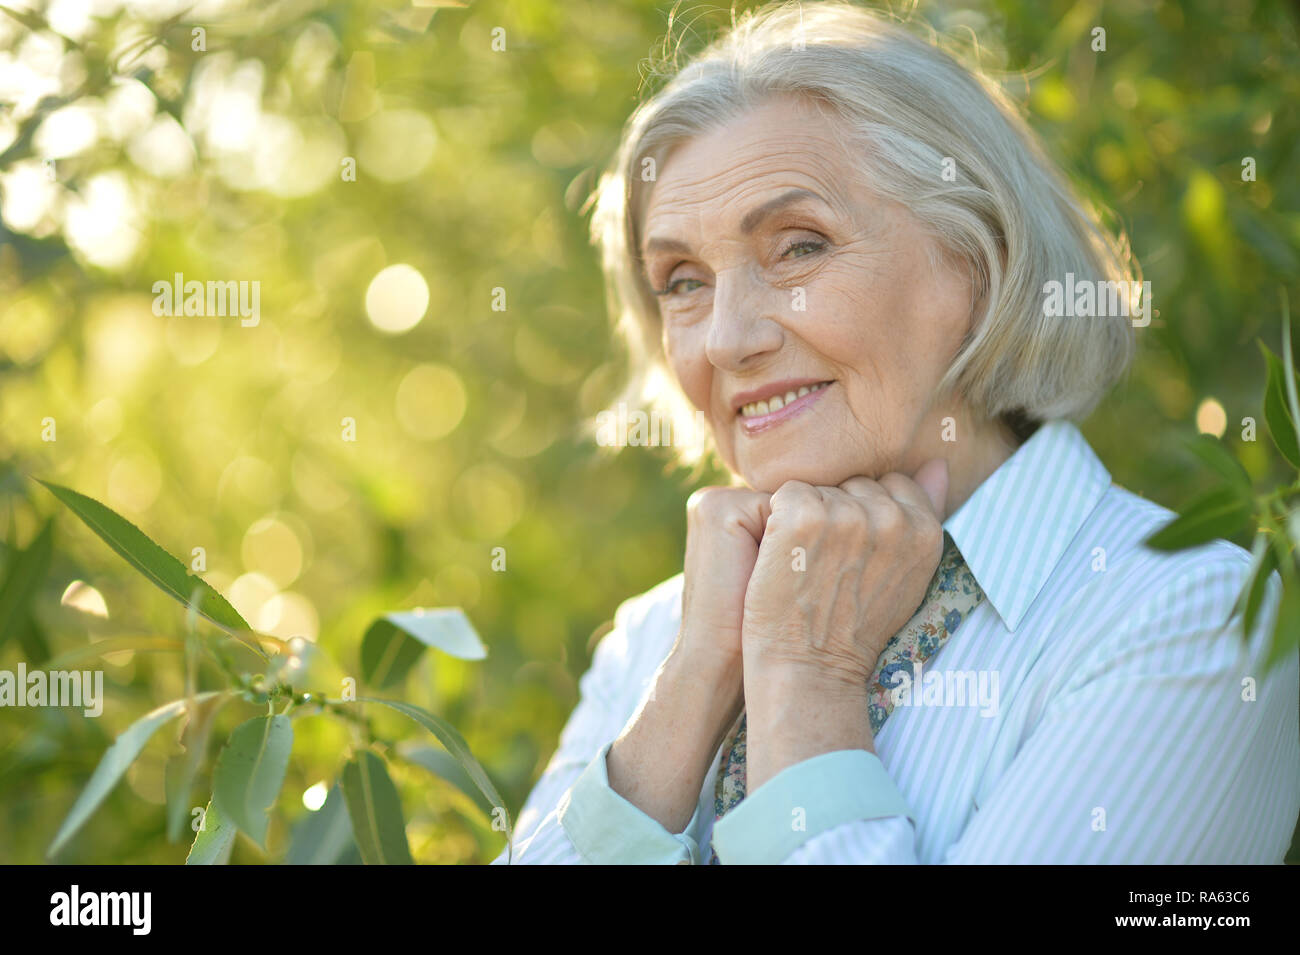 Portrait Of A Beautiful Happy Elderly Woman Stock Photo, Picture